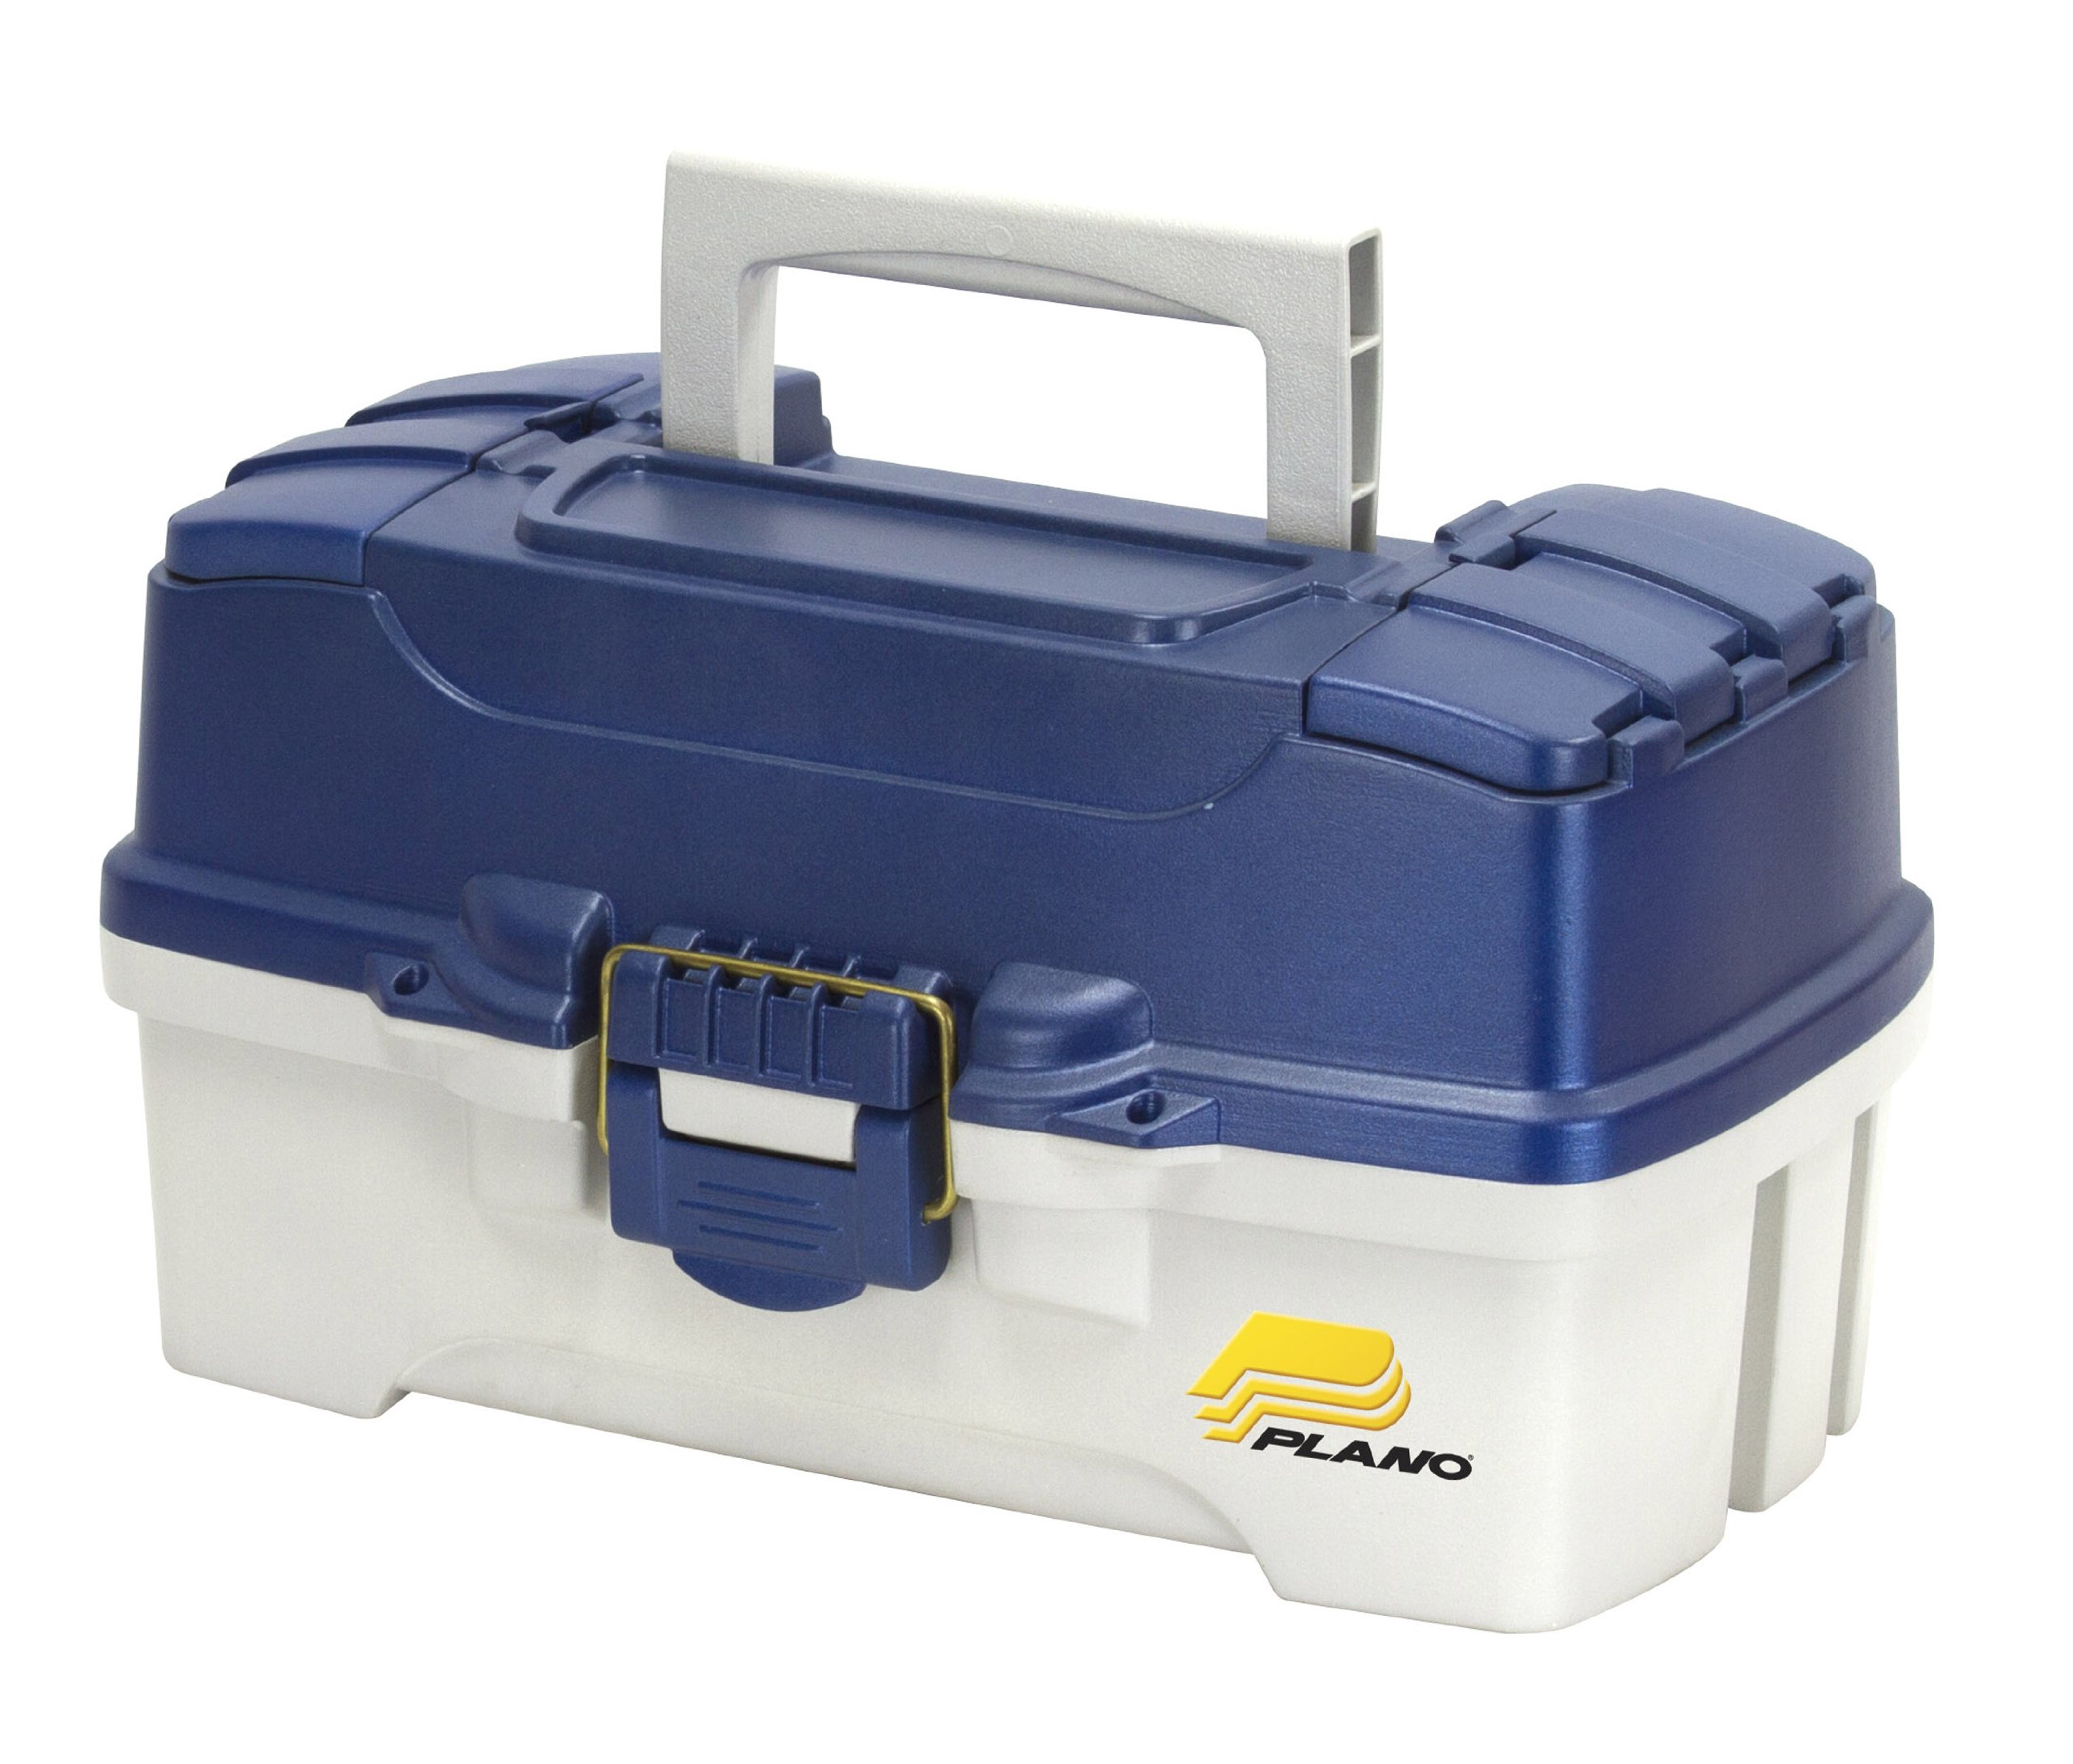 Plano 2-Tray Tackle Box with Dual Top Access, Blue Metallic/Off